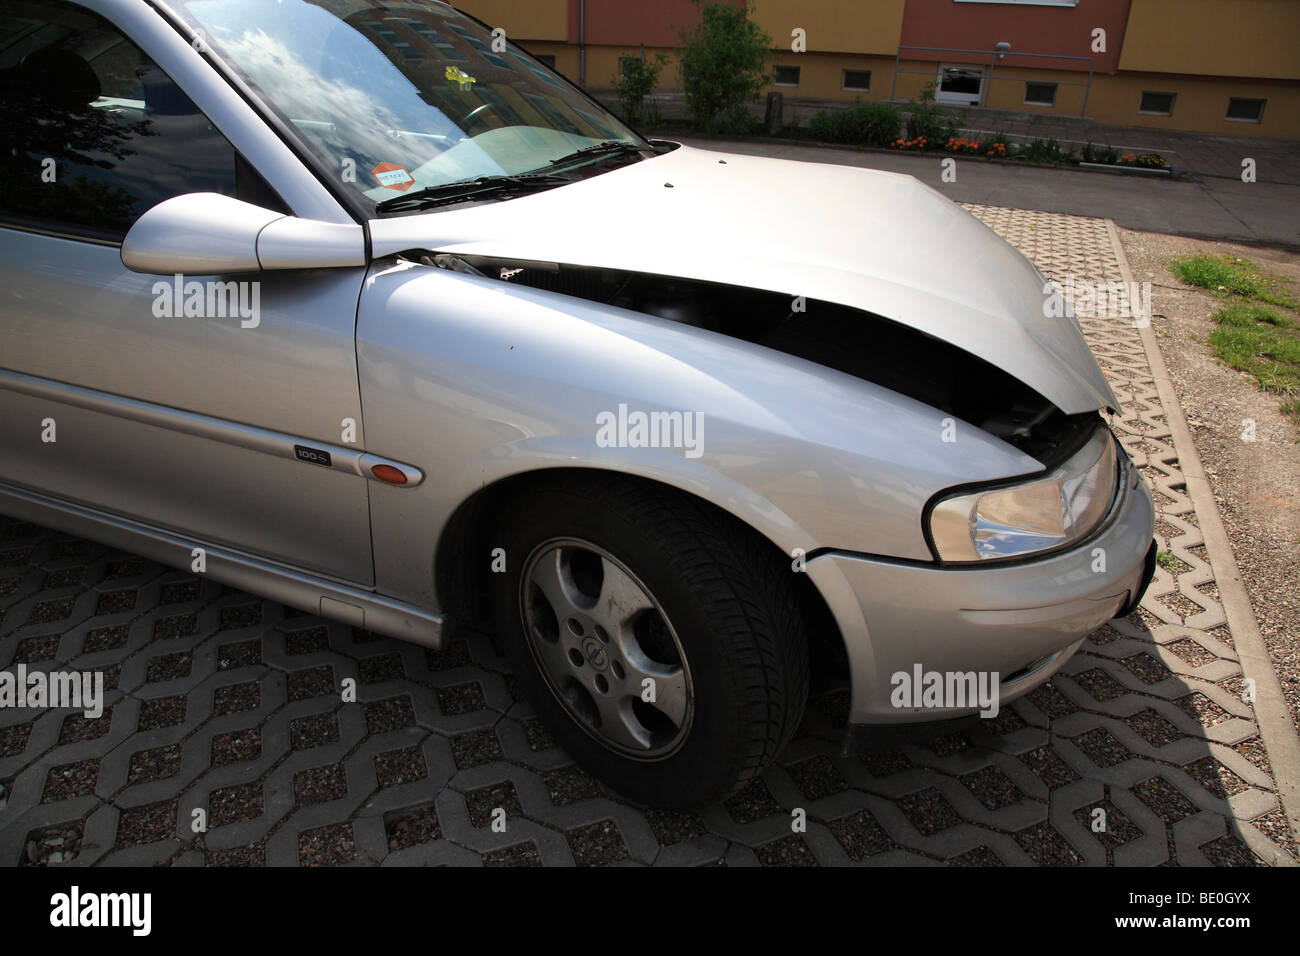 damaged front of a car (Opel Vectra) after an accident Stock Photo